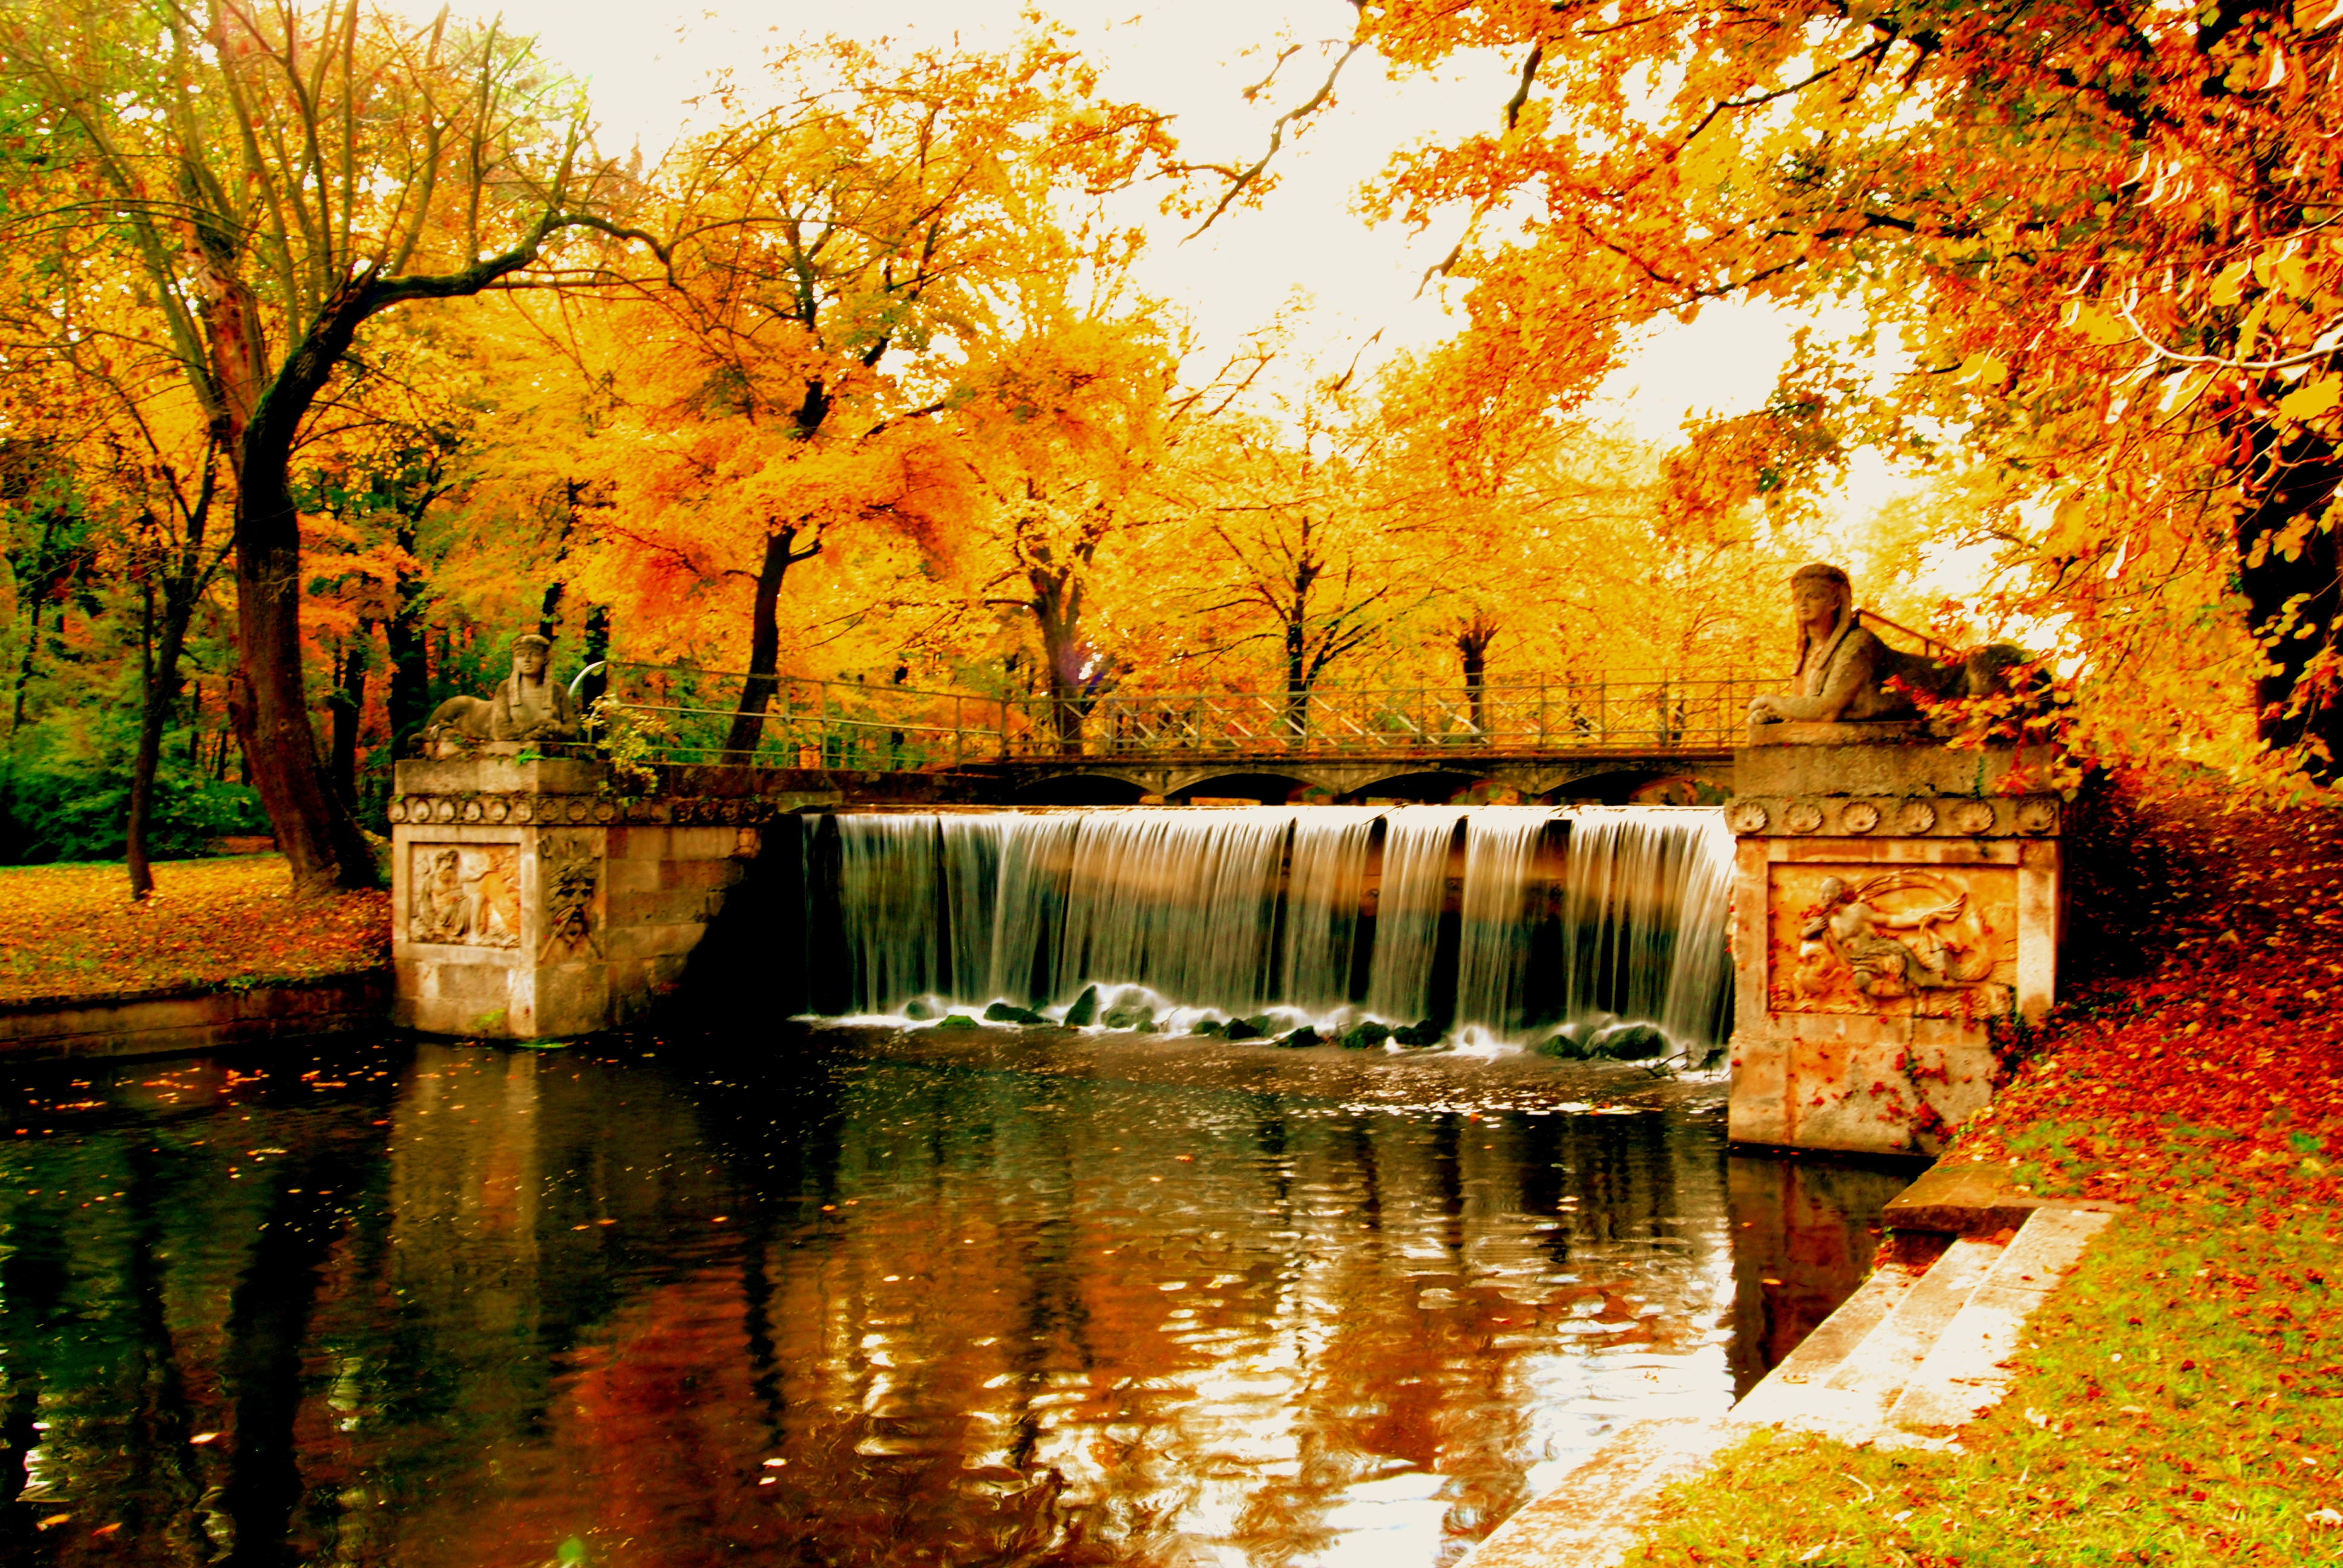 @projectfairytale: The Most Beautiful places to Visit this Fall